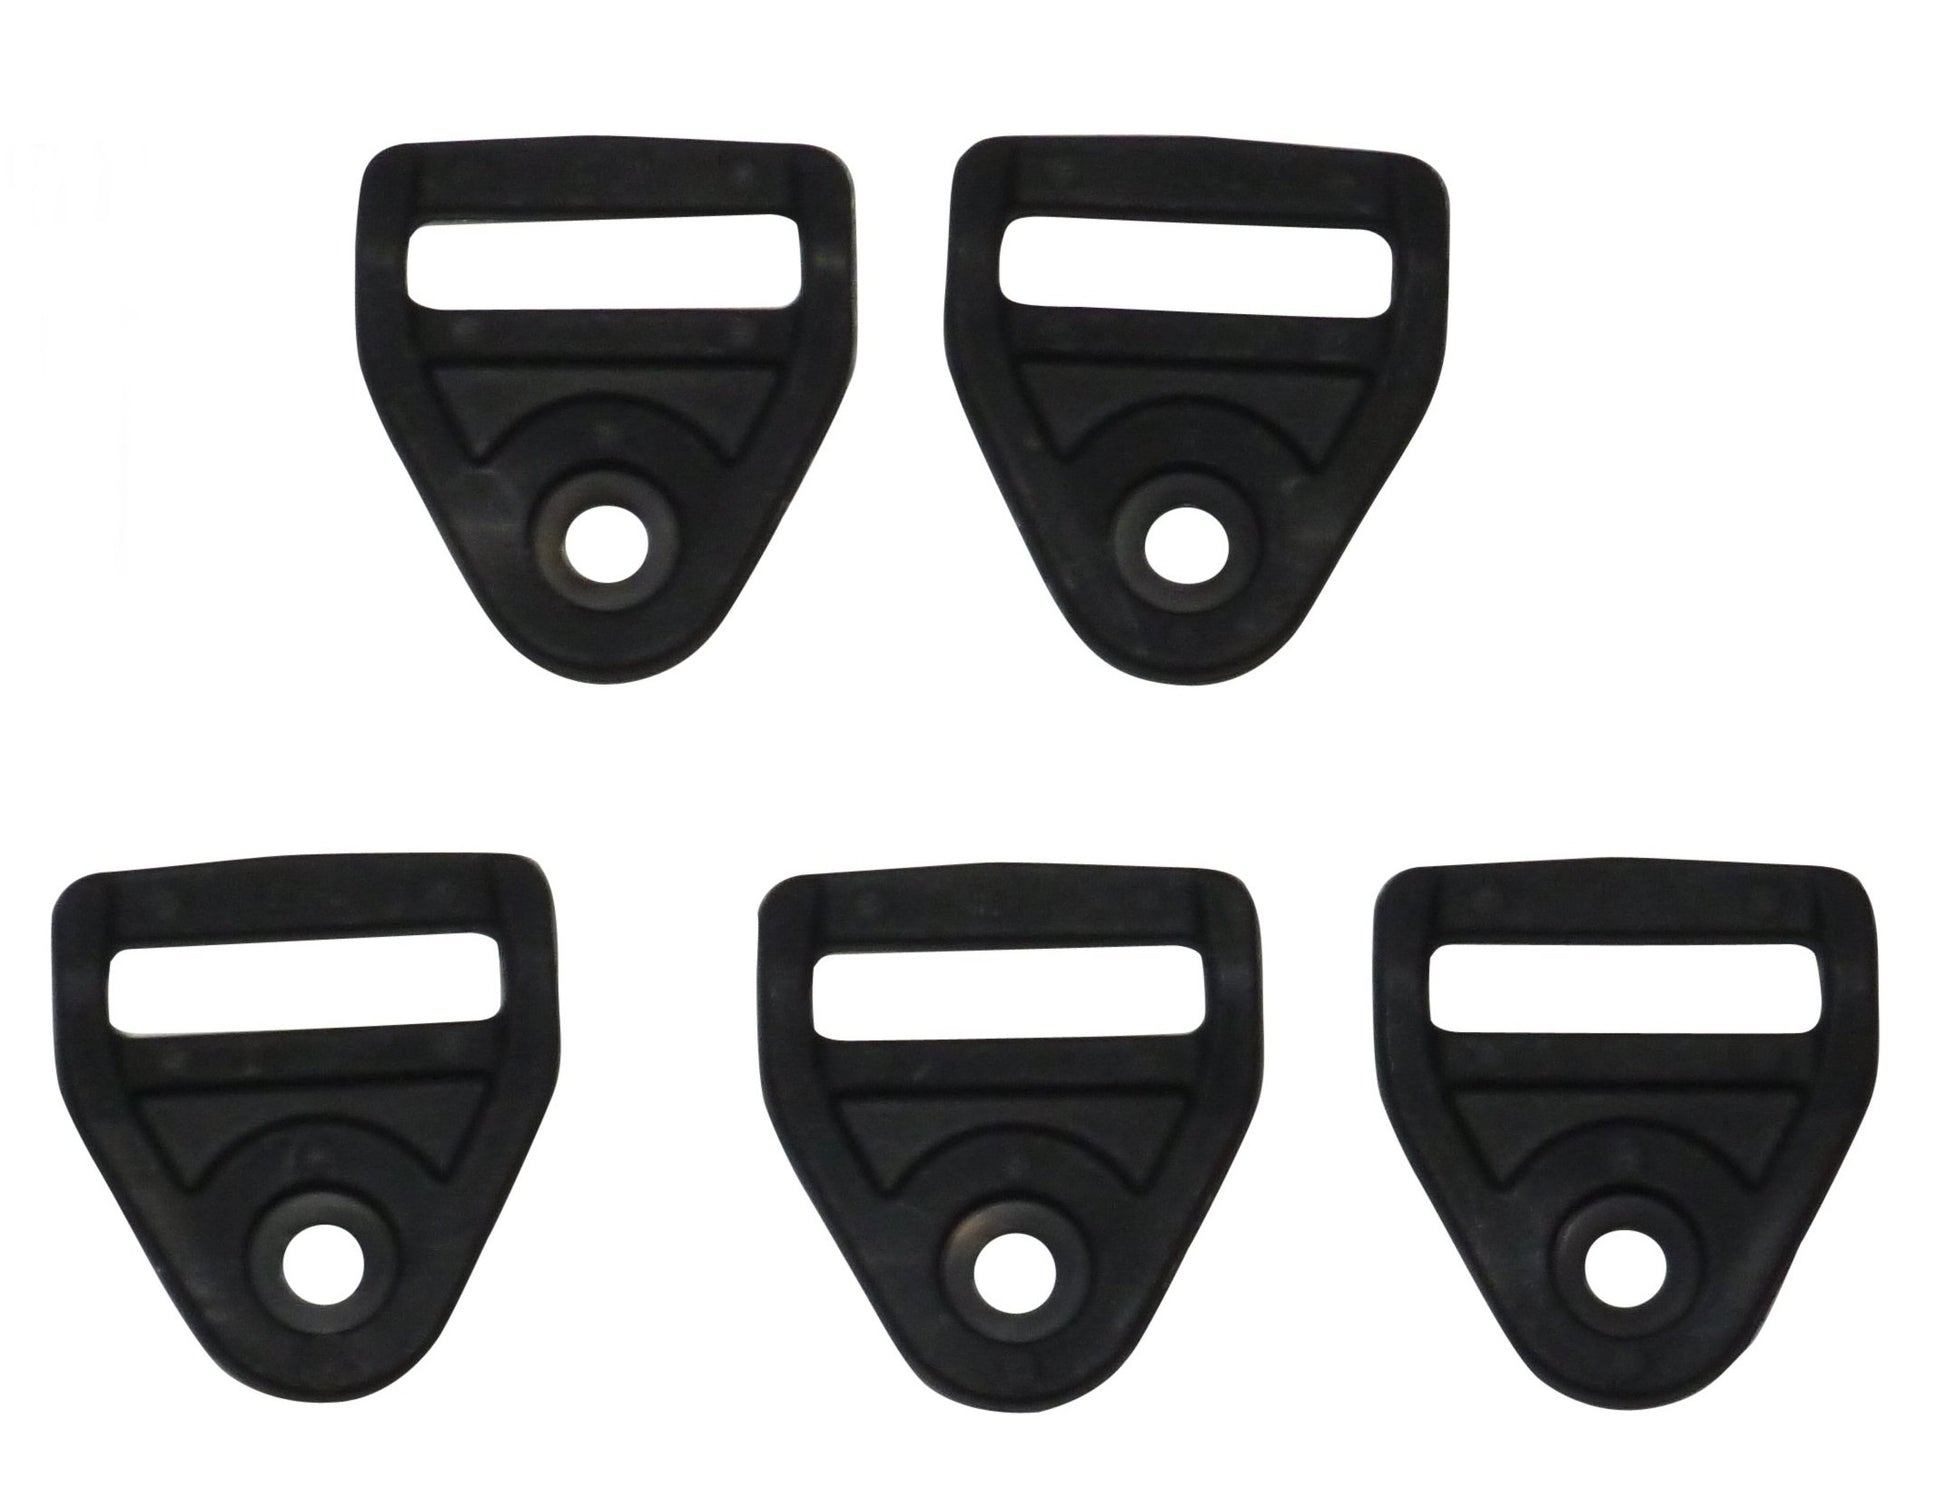 Benristraps 25mm anchor plate in black plastic (pack of 5)